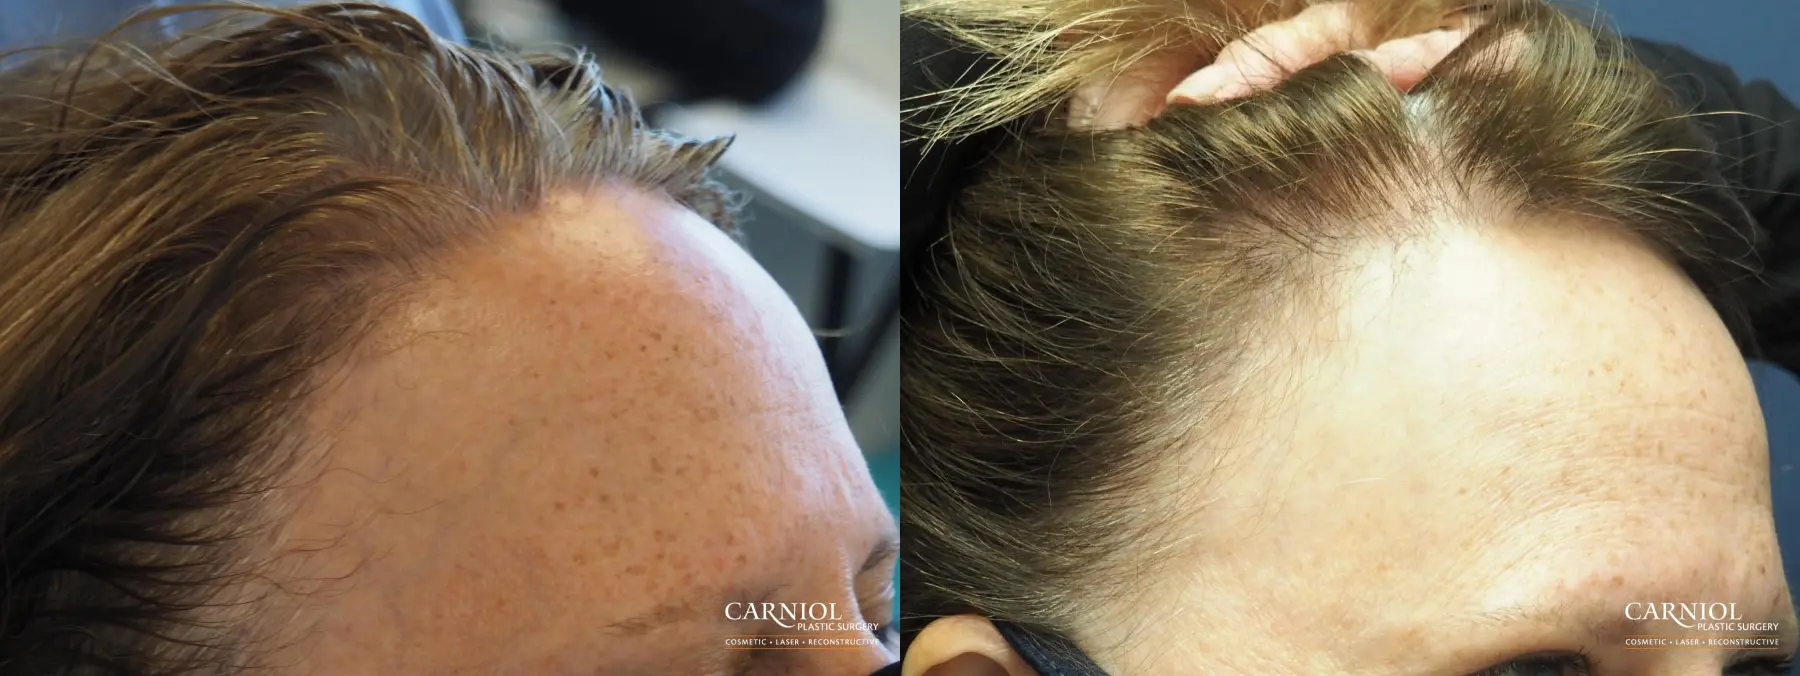 Nonsurgical Hair Restoration: Patient 1 - Before and After 2